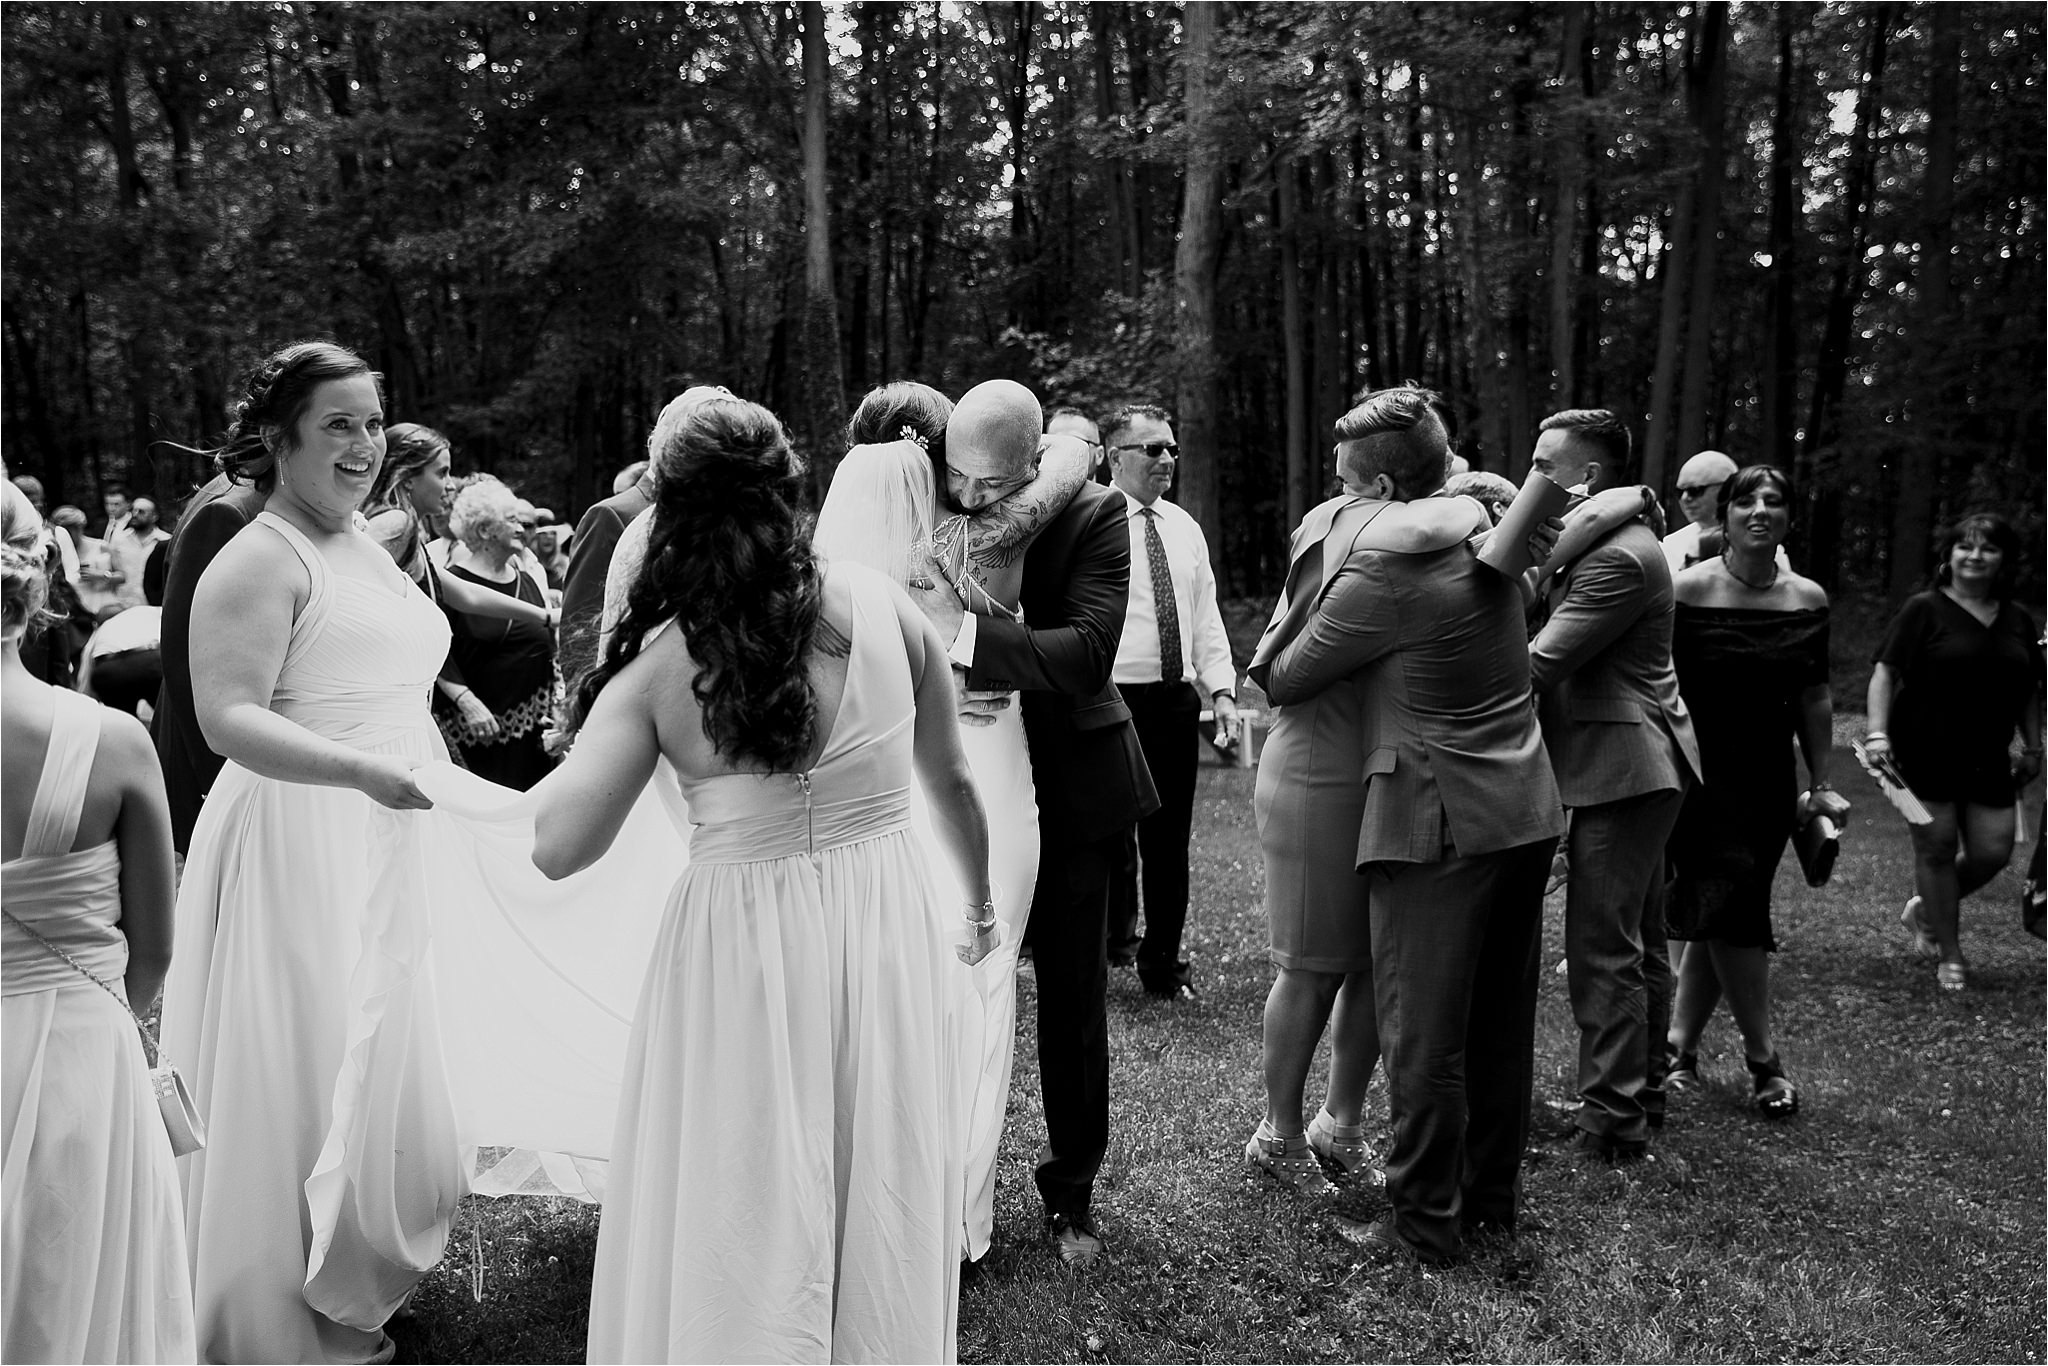 Sonia V Photography, The Clearing ceremony wedding venue, hugs after the ceremony